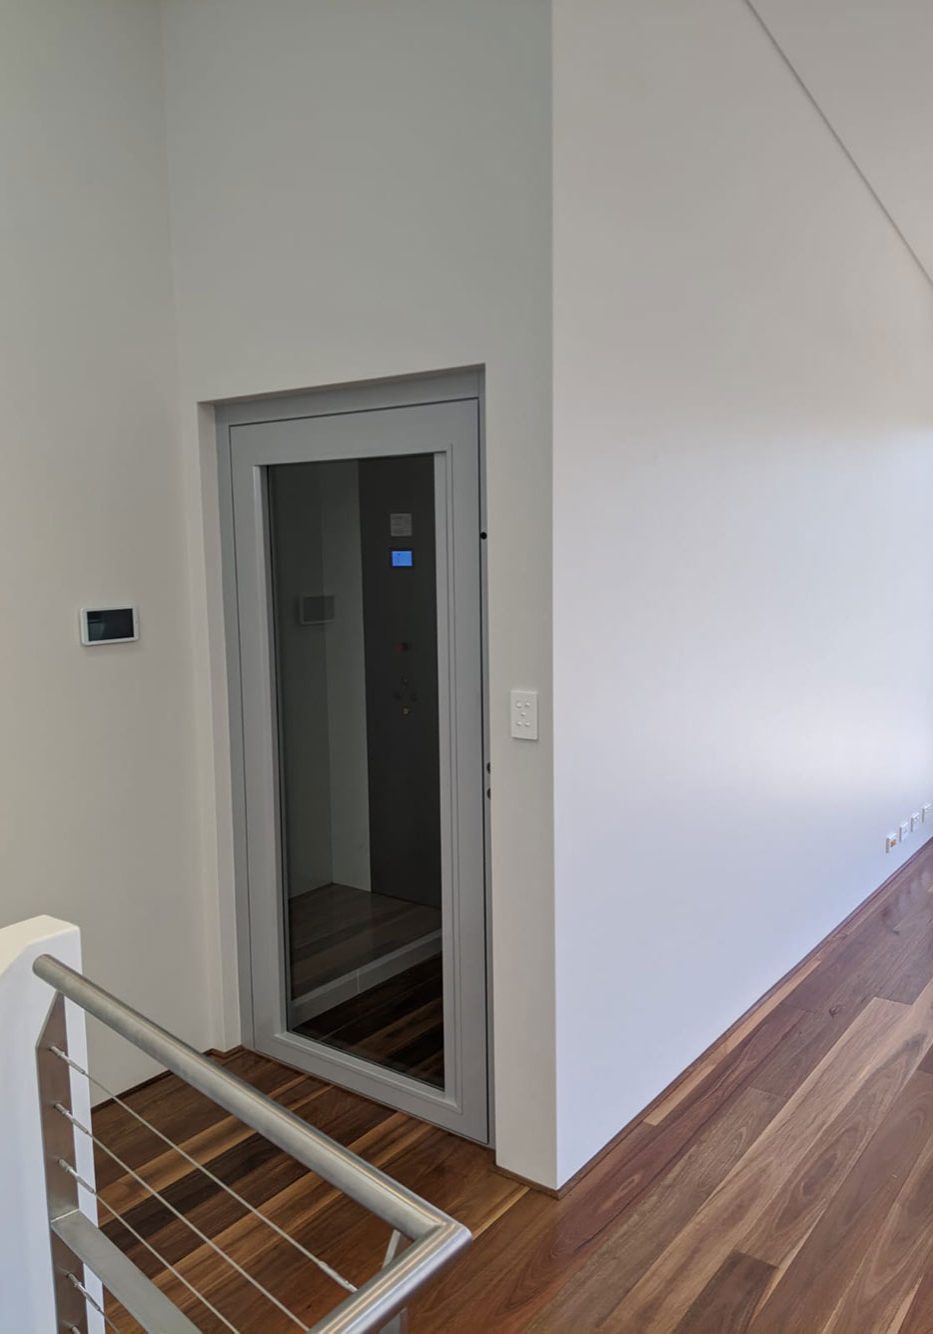 A stylish glass door lift installed in a residential Shelly home